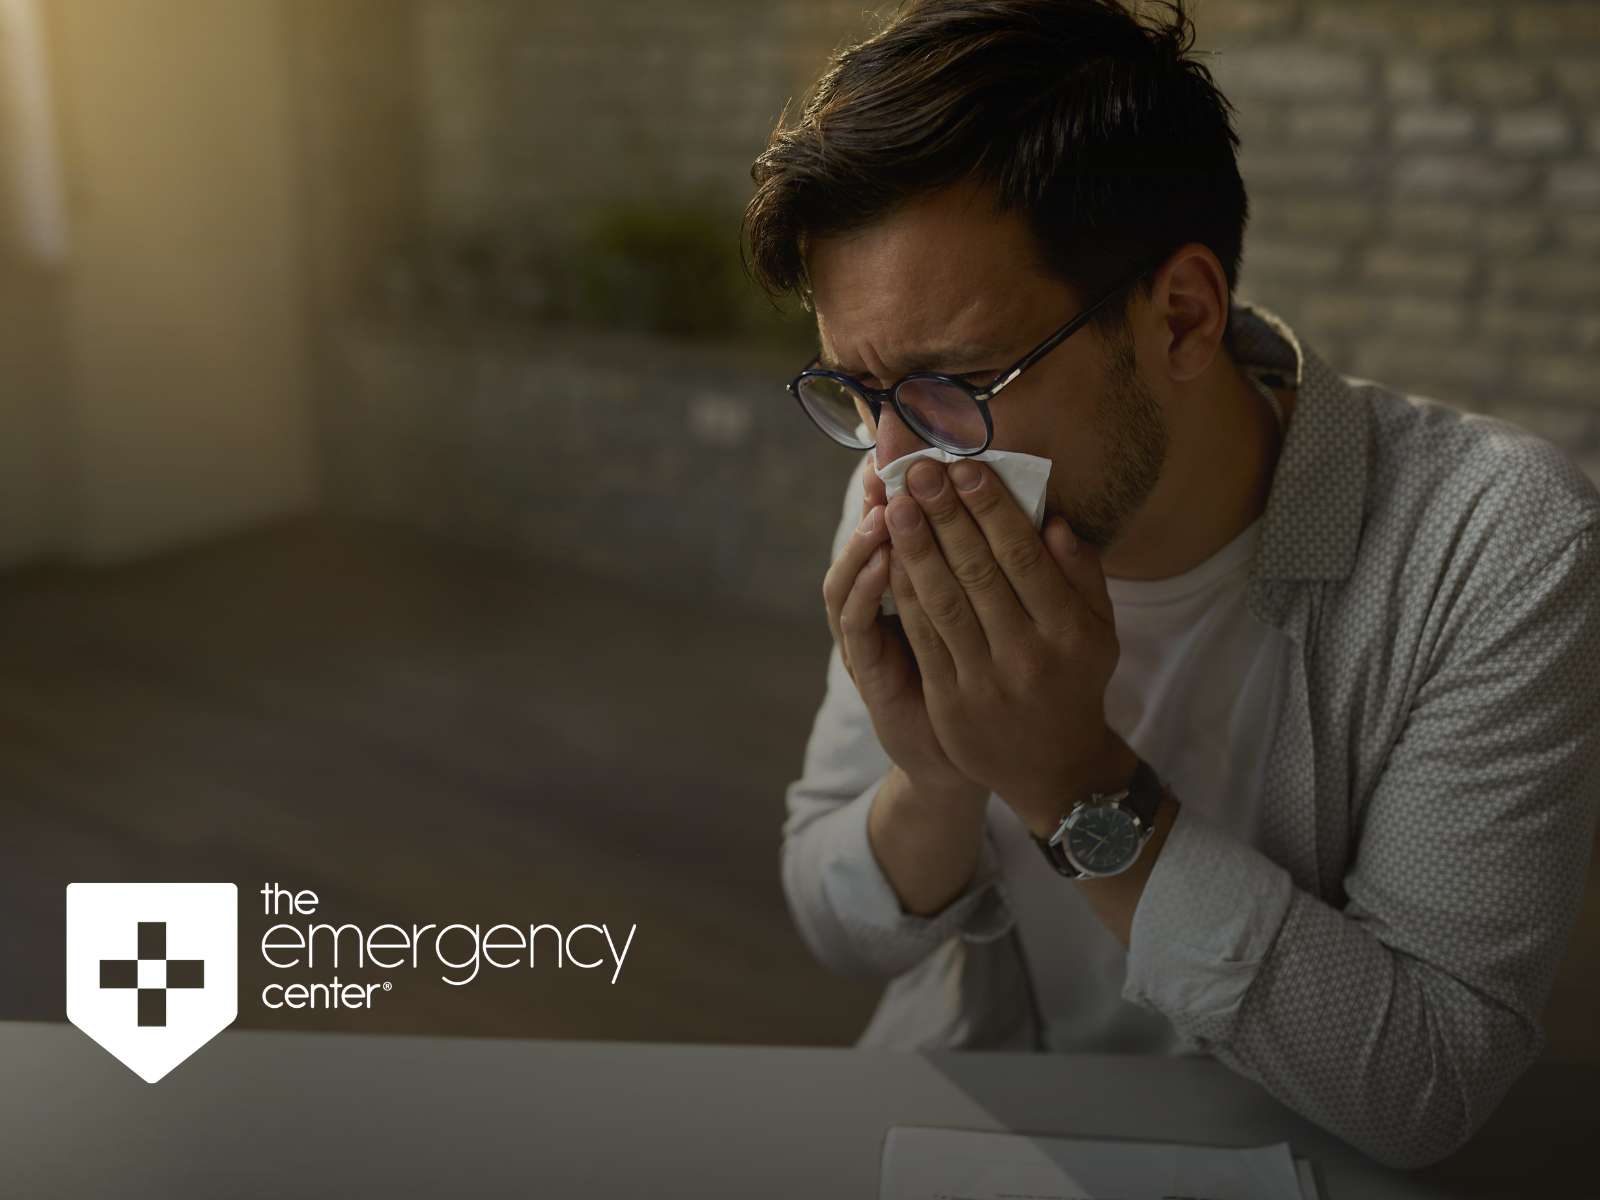 Upper Respiratory Infection Symptoms: When to Visit the ER?